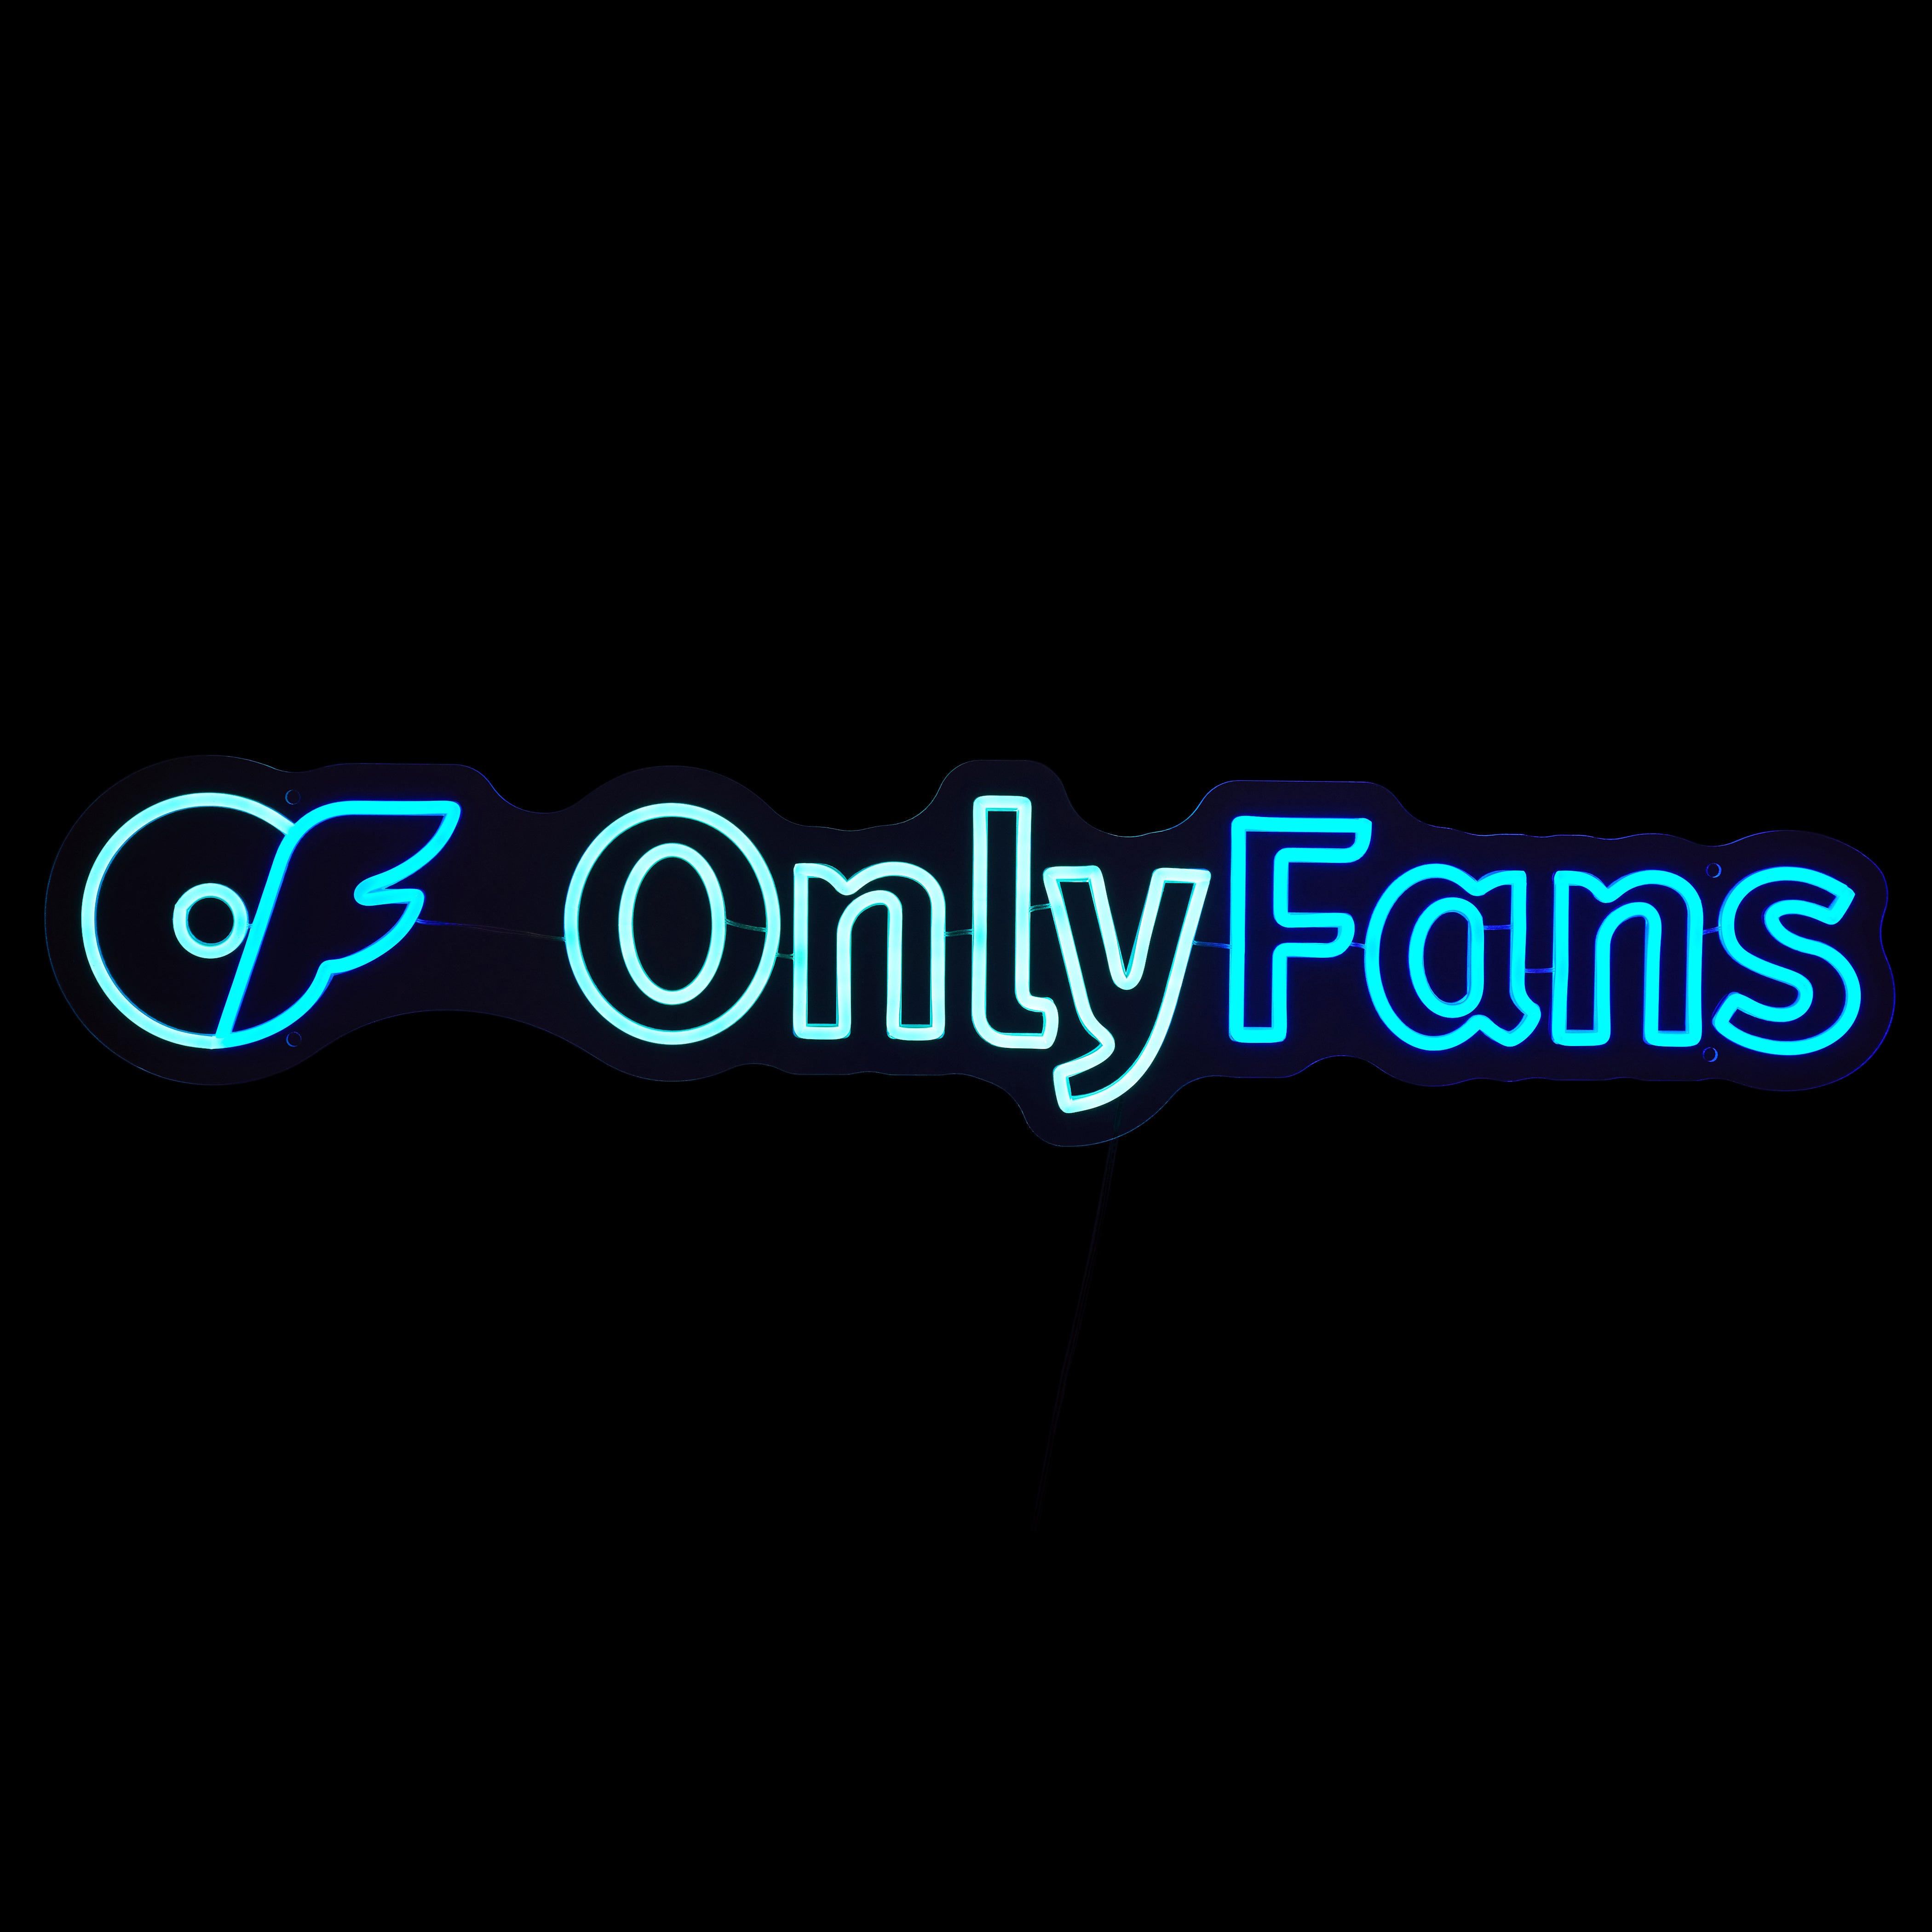 Onlyfans png images | PNGWing